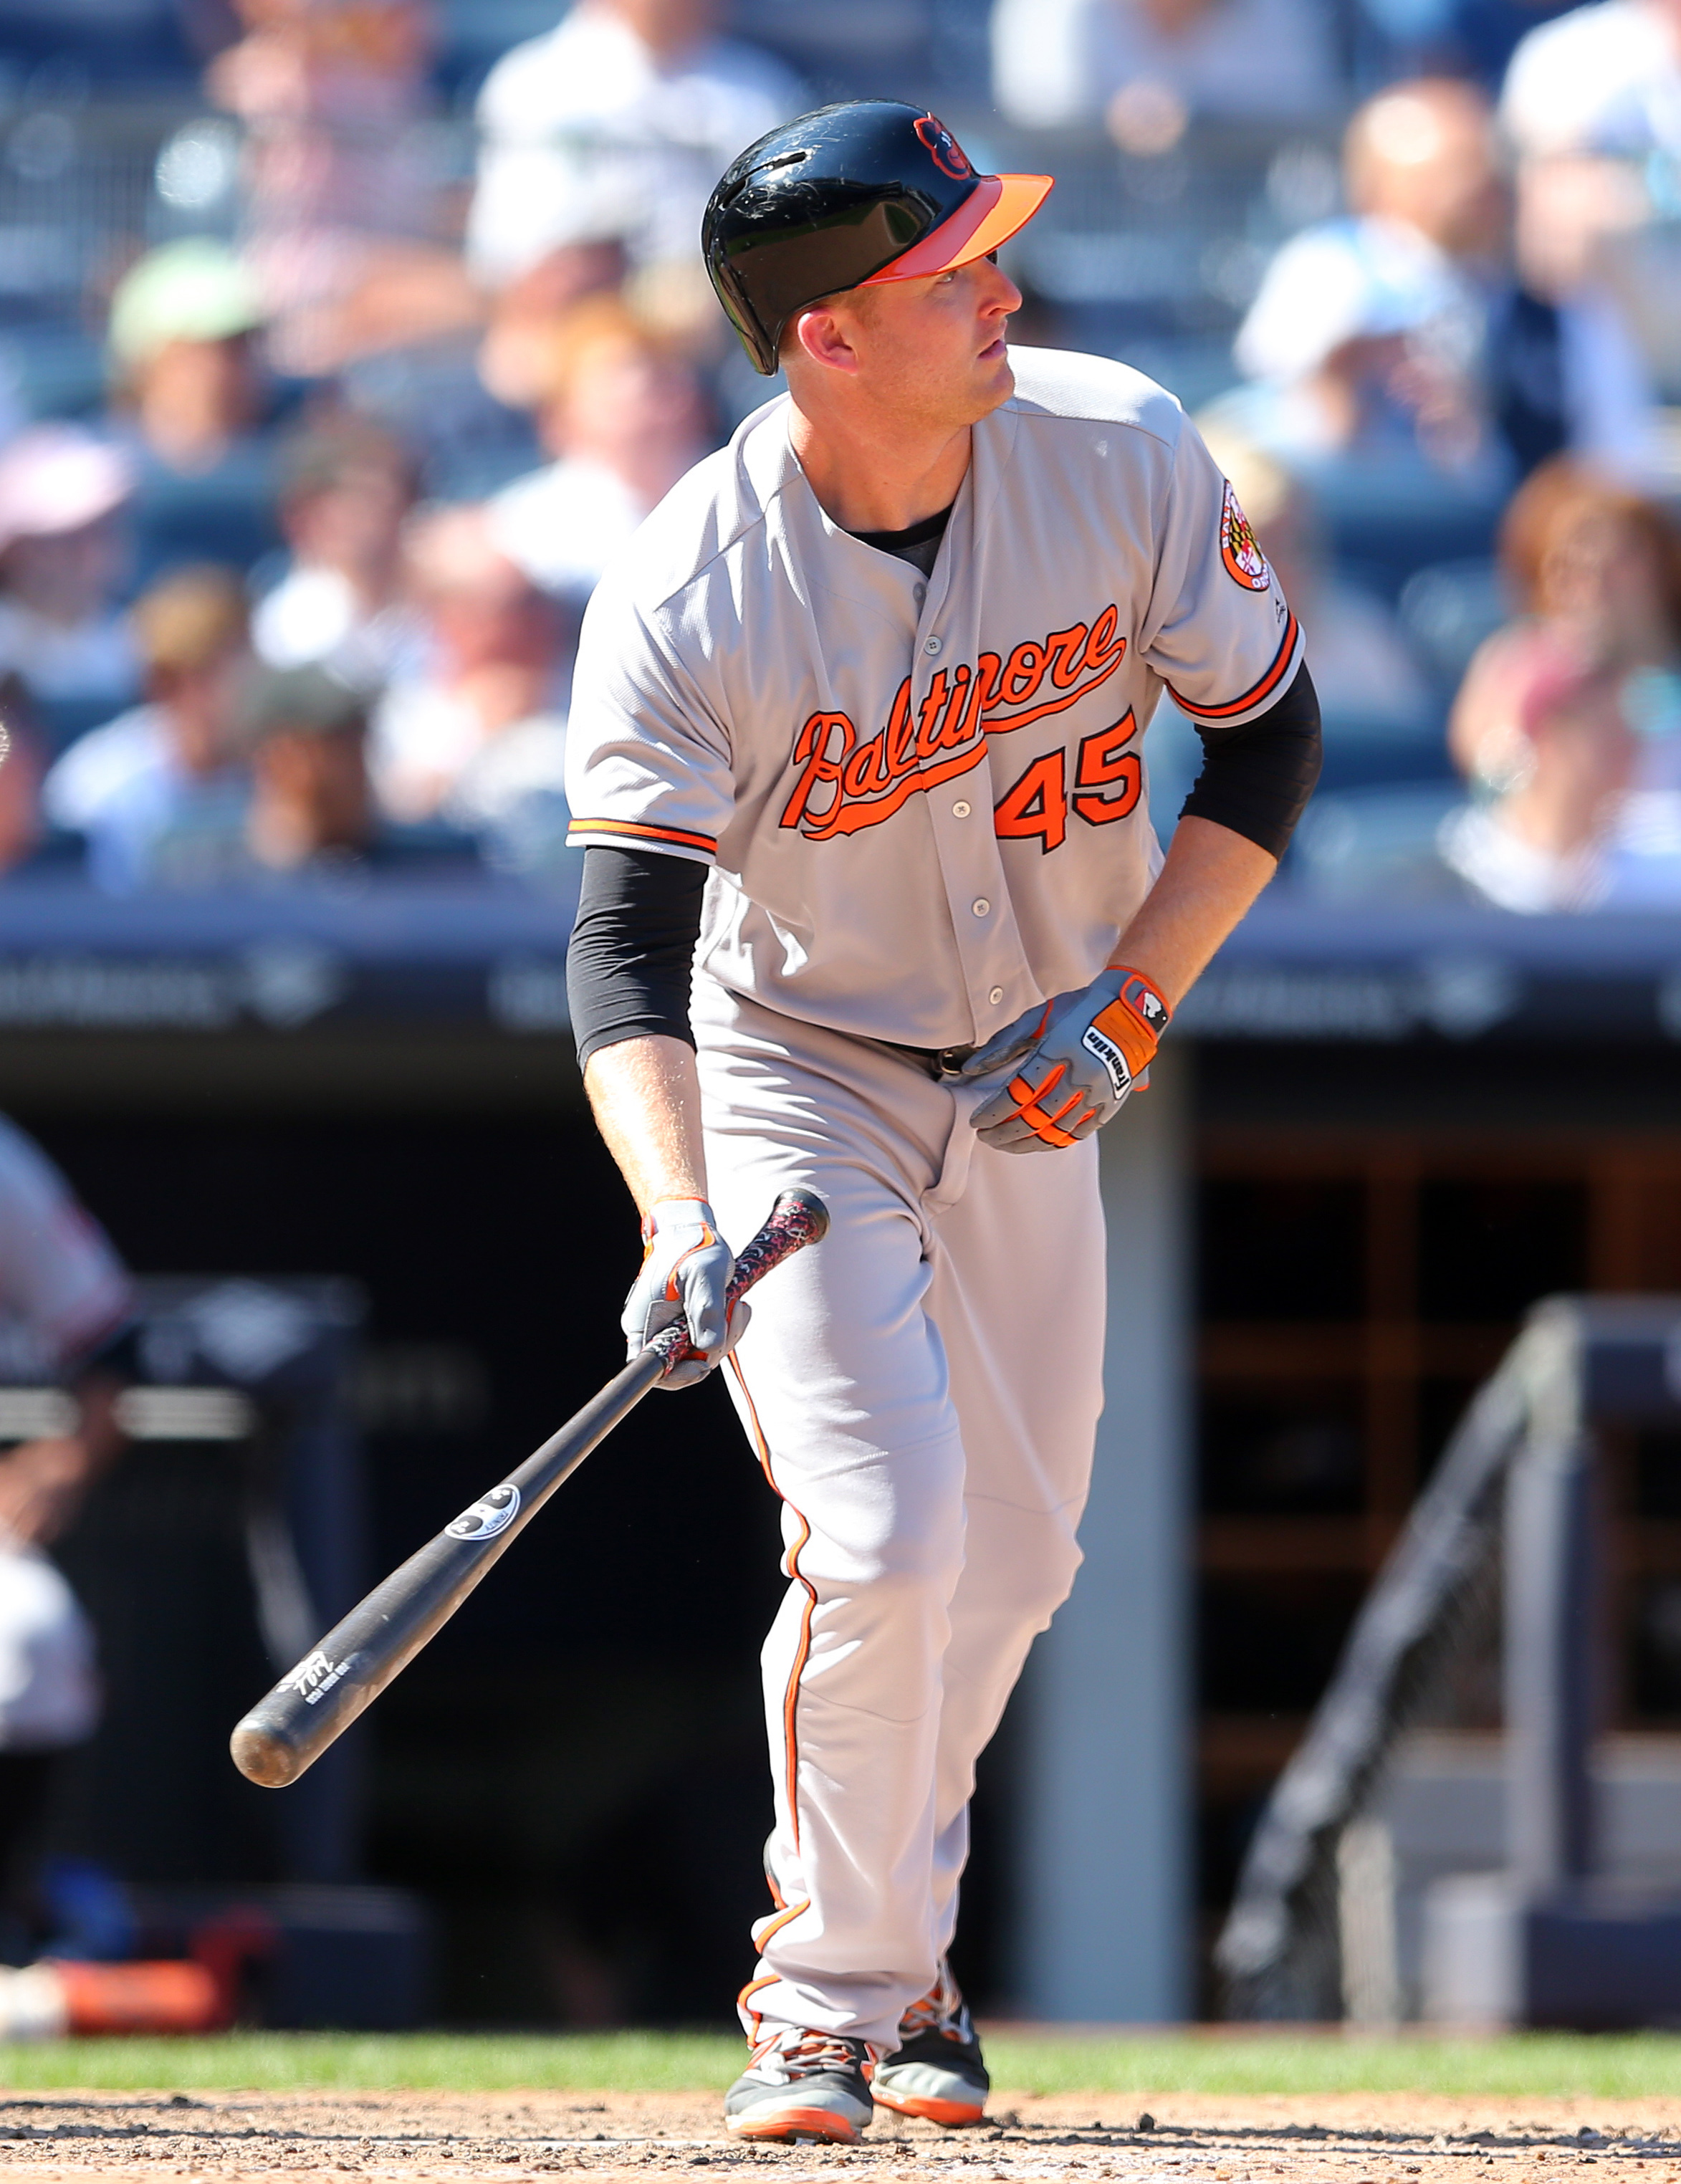 mark trumbo number off 58% - www 